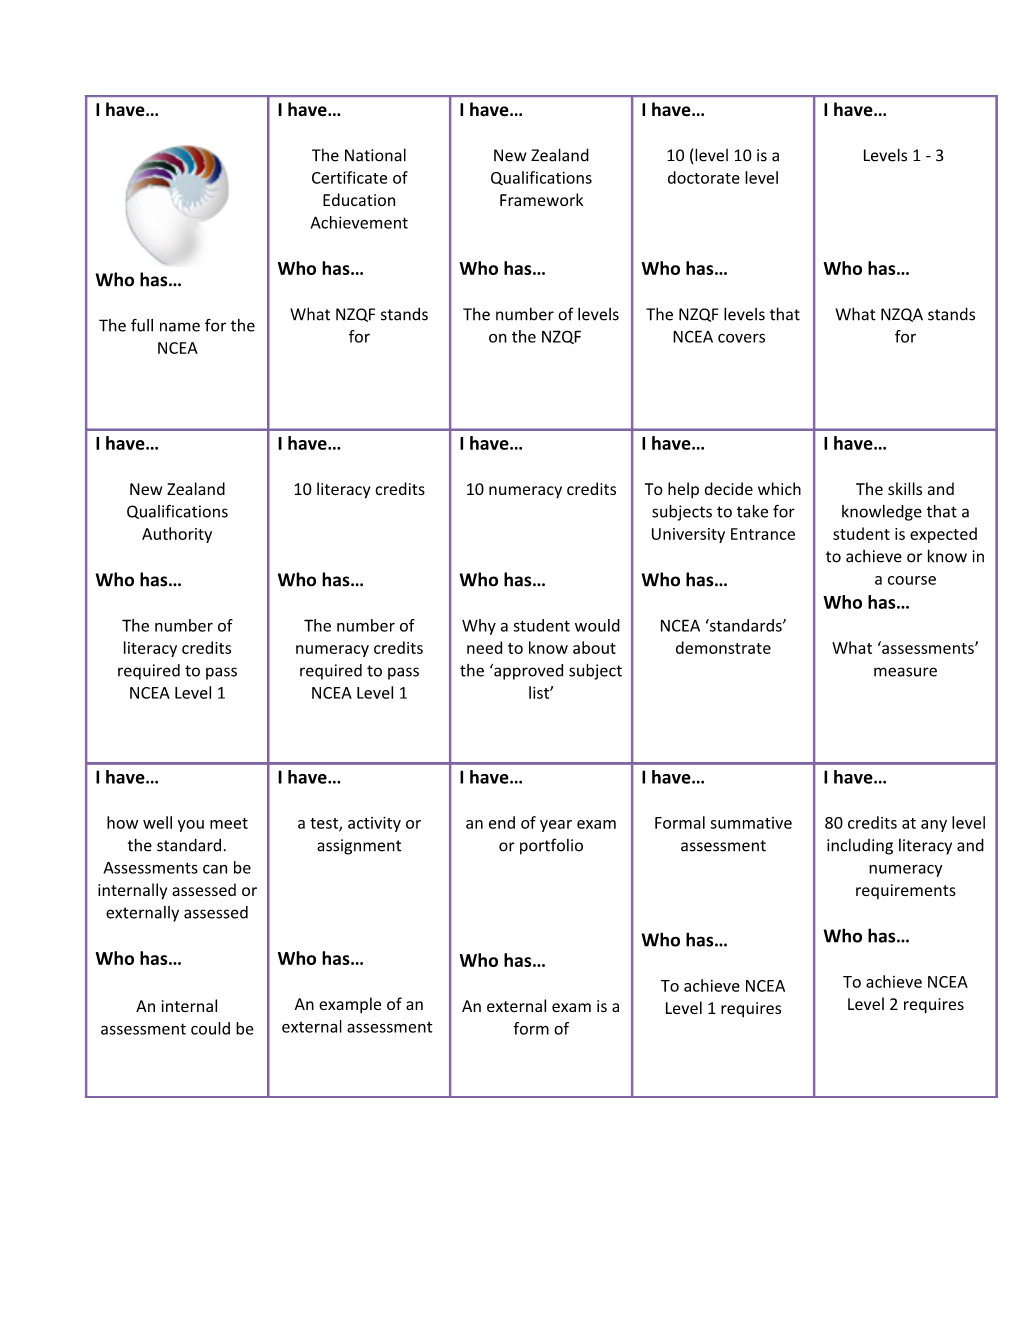 20 Questions About NCEA (Dominoes Activity)